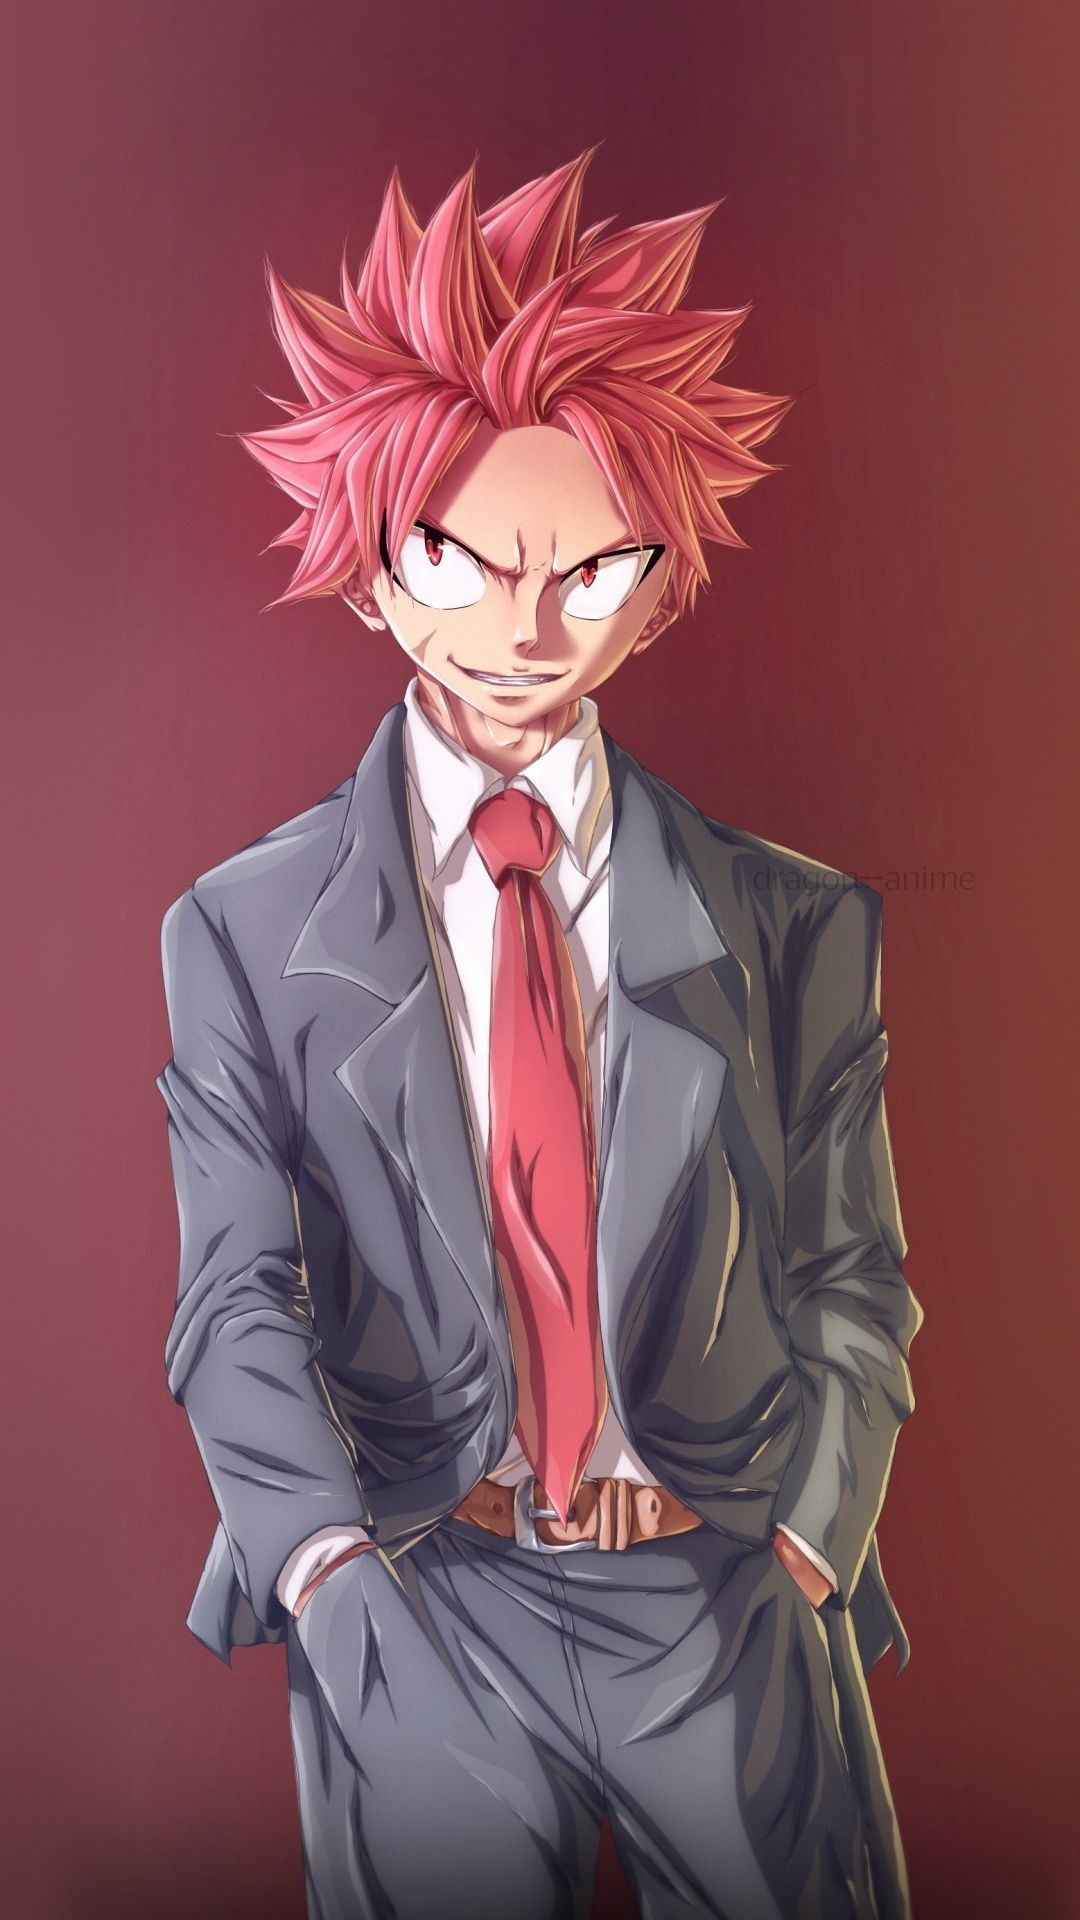 Natsu (Fairy Tail): The main male protagonist of the series and a member of the wizards' guild. 1080x1920 Full HD Background.